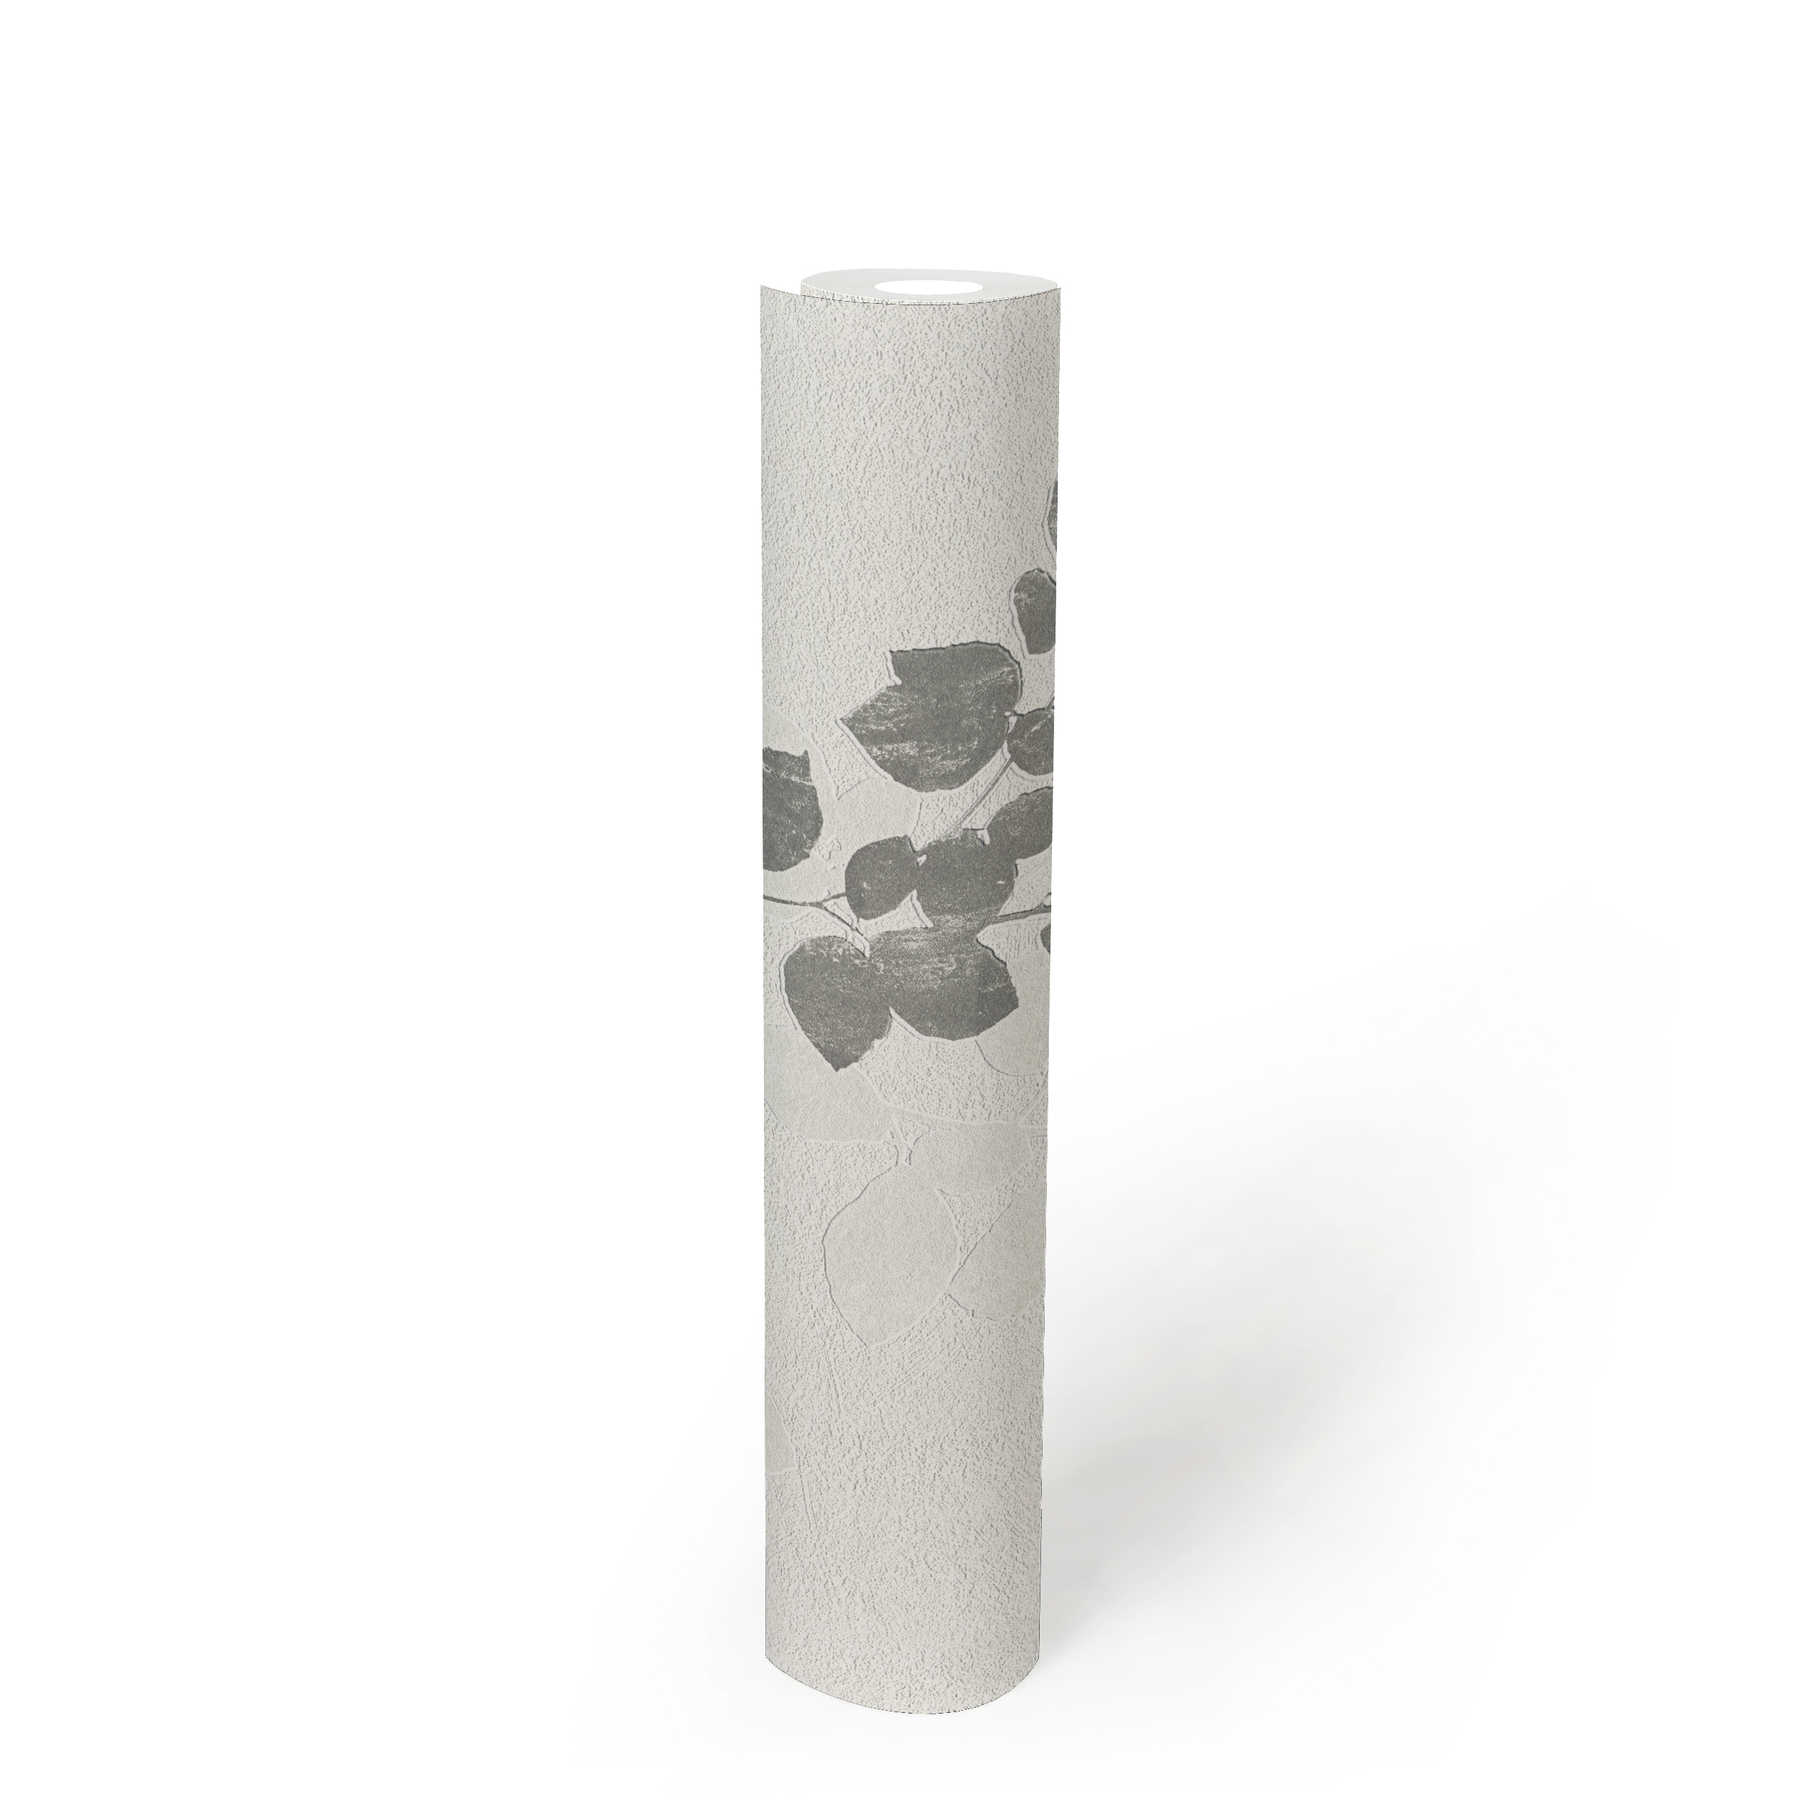             Nature design wallpaper with leaves & texture effect - cream
        